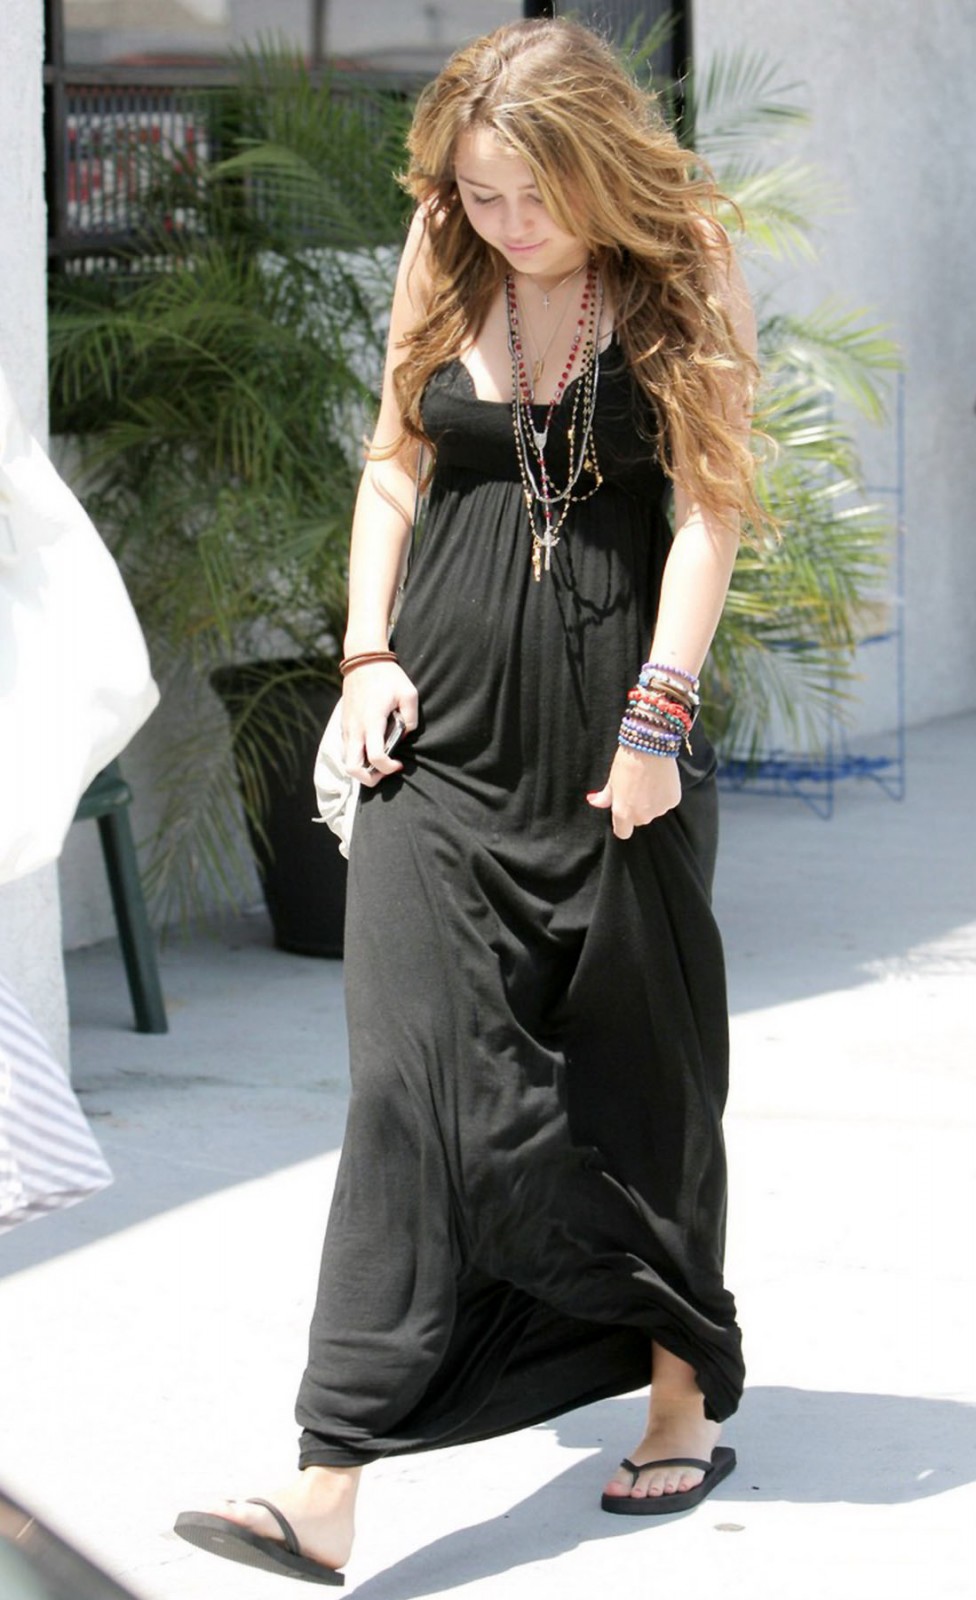 Miley-Cyrus-20090831_Out-n-About-Studio-City_May09_12771-976x1600.jpg